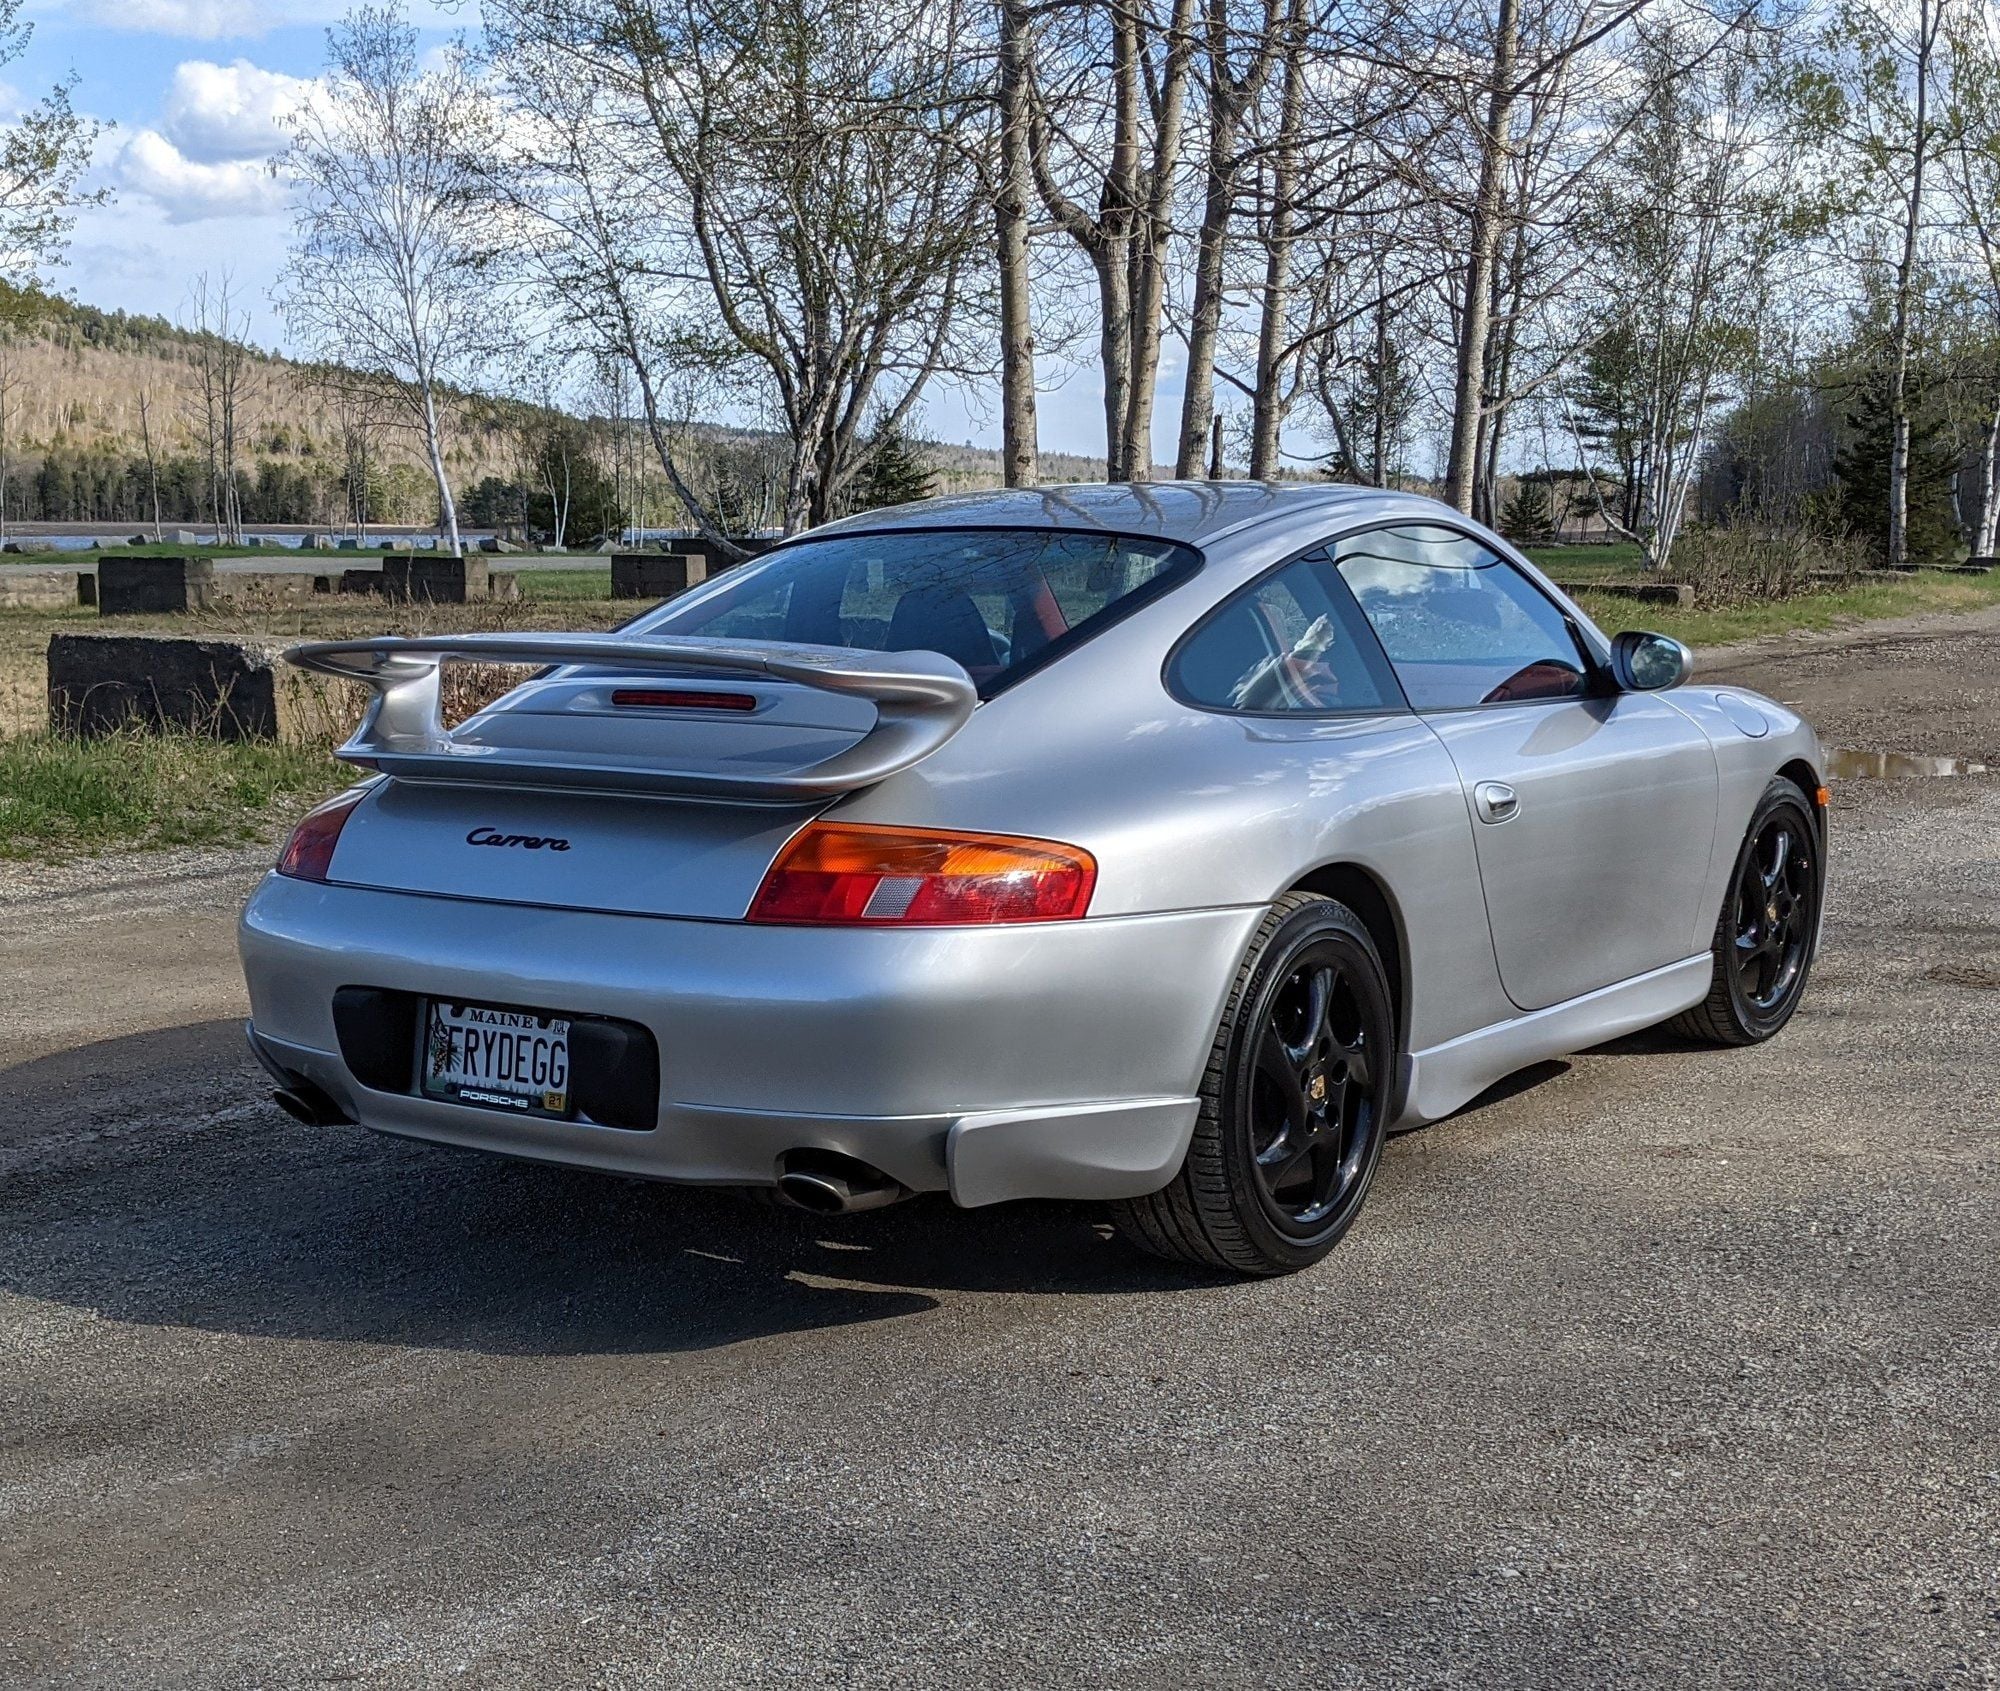 1999 Porsche 911 - 1999 (3/98) 6-speed Aerokit - 45k miles; LSD, sport package, hollow TTs, and more - Used - VIN WP0AA2991XS621602 - 45,500 Miles - 6 cyl - 2WD - Manual - Coupe - Silver - Hampden, ME 04444, United States